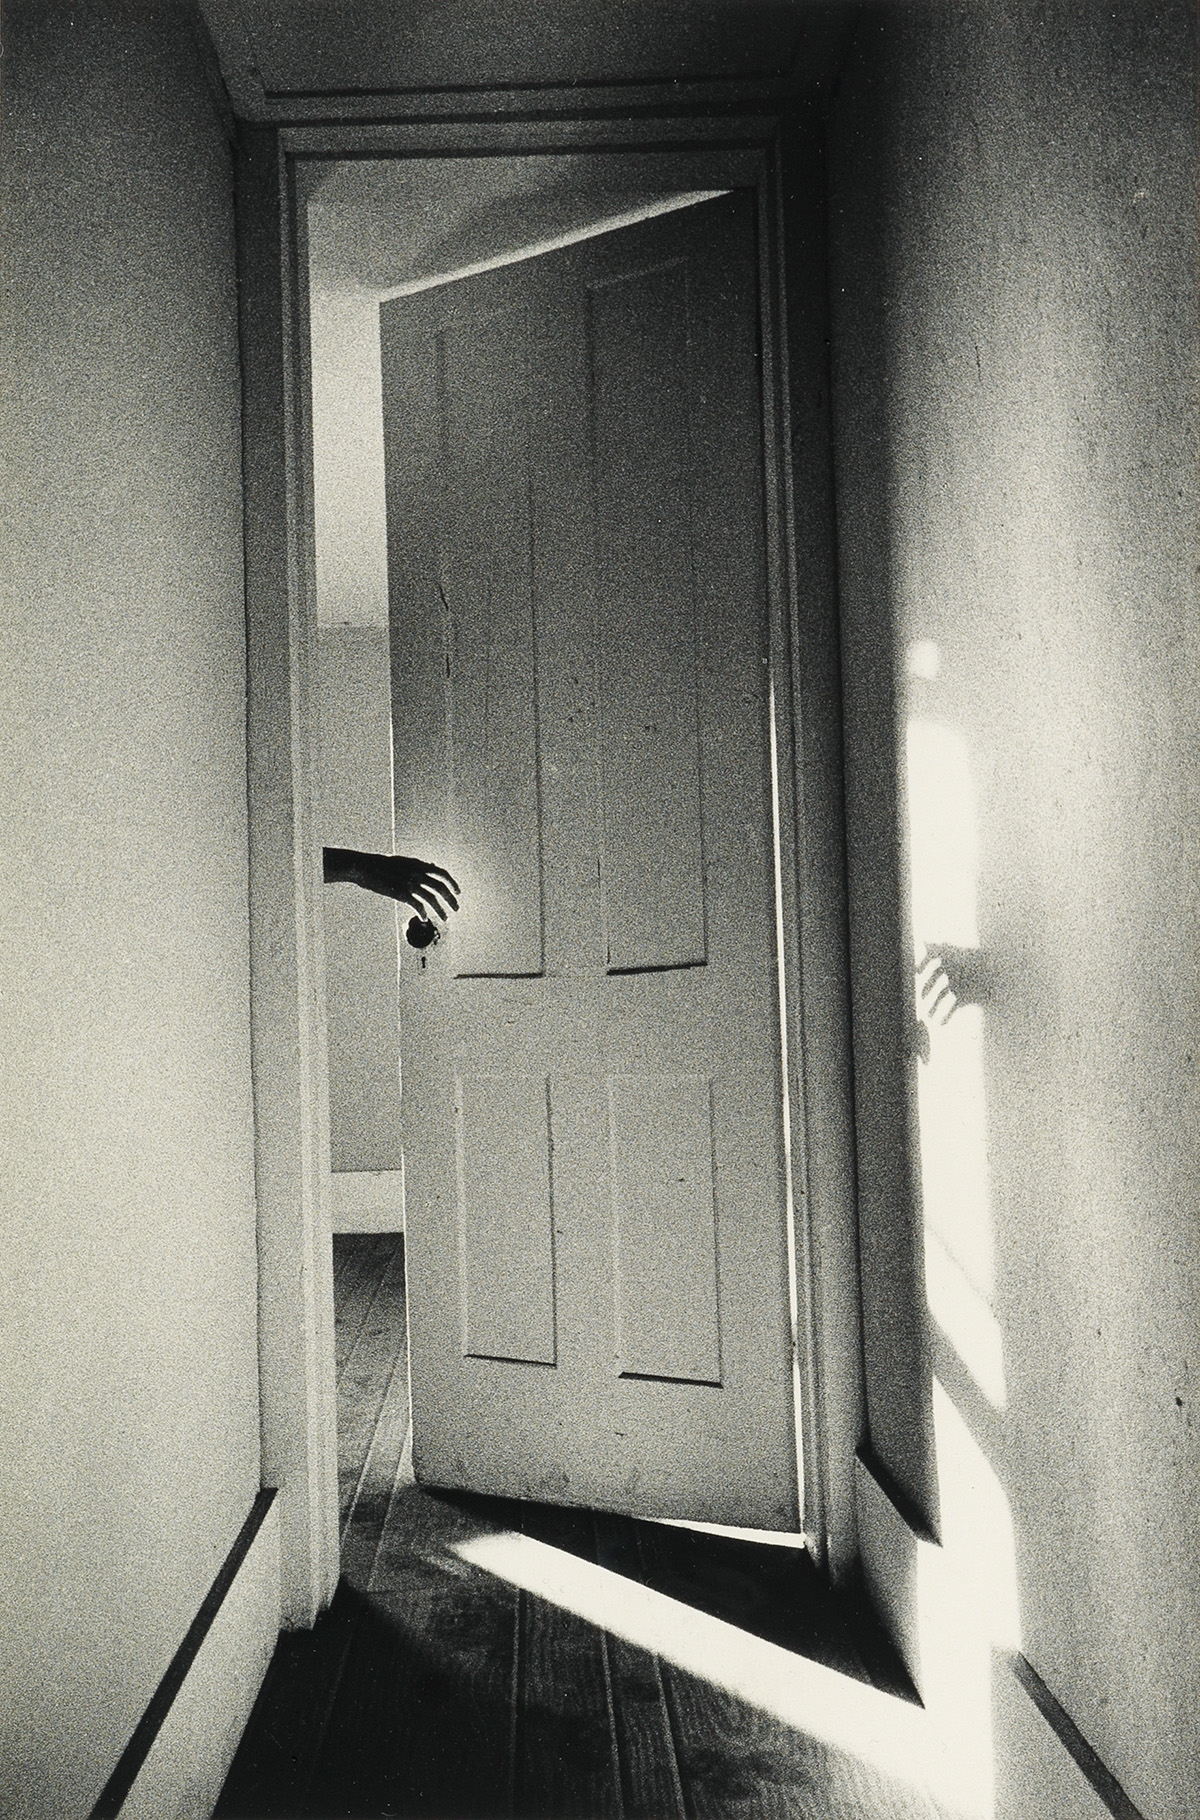 Hand Through Door, from The Somnambulist. by Ralph Gibson, 1969